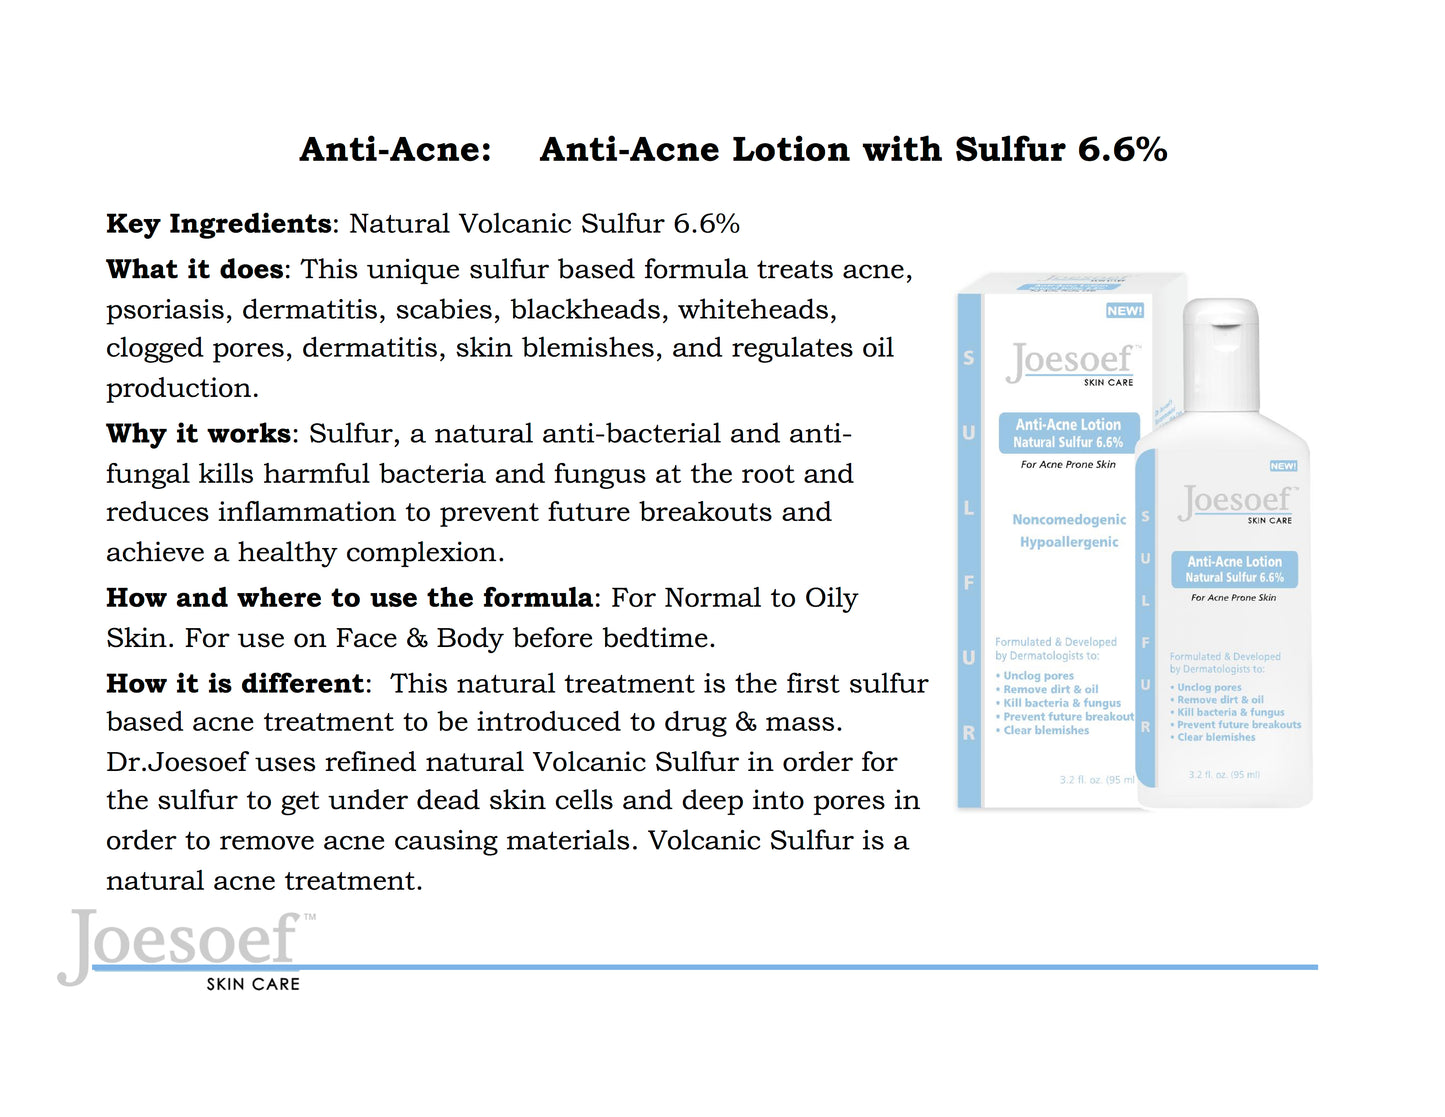 Sulfur Lotion for Acne